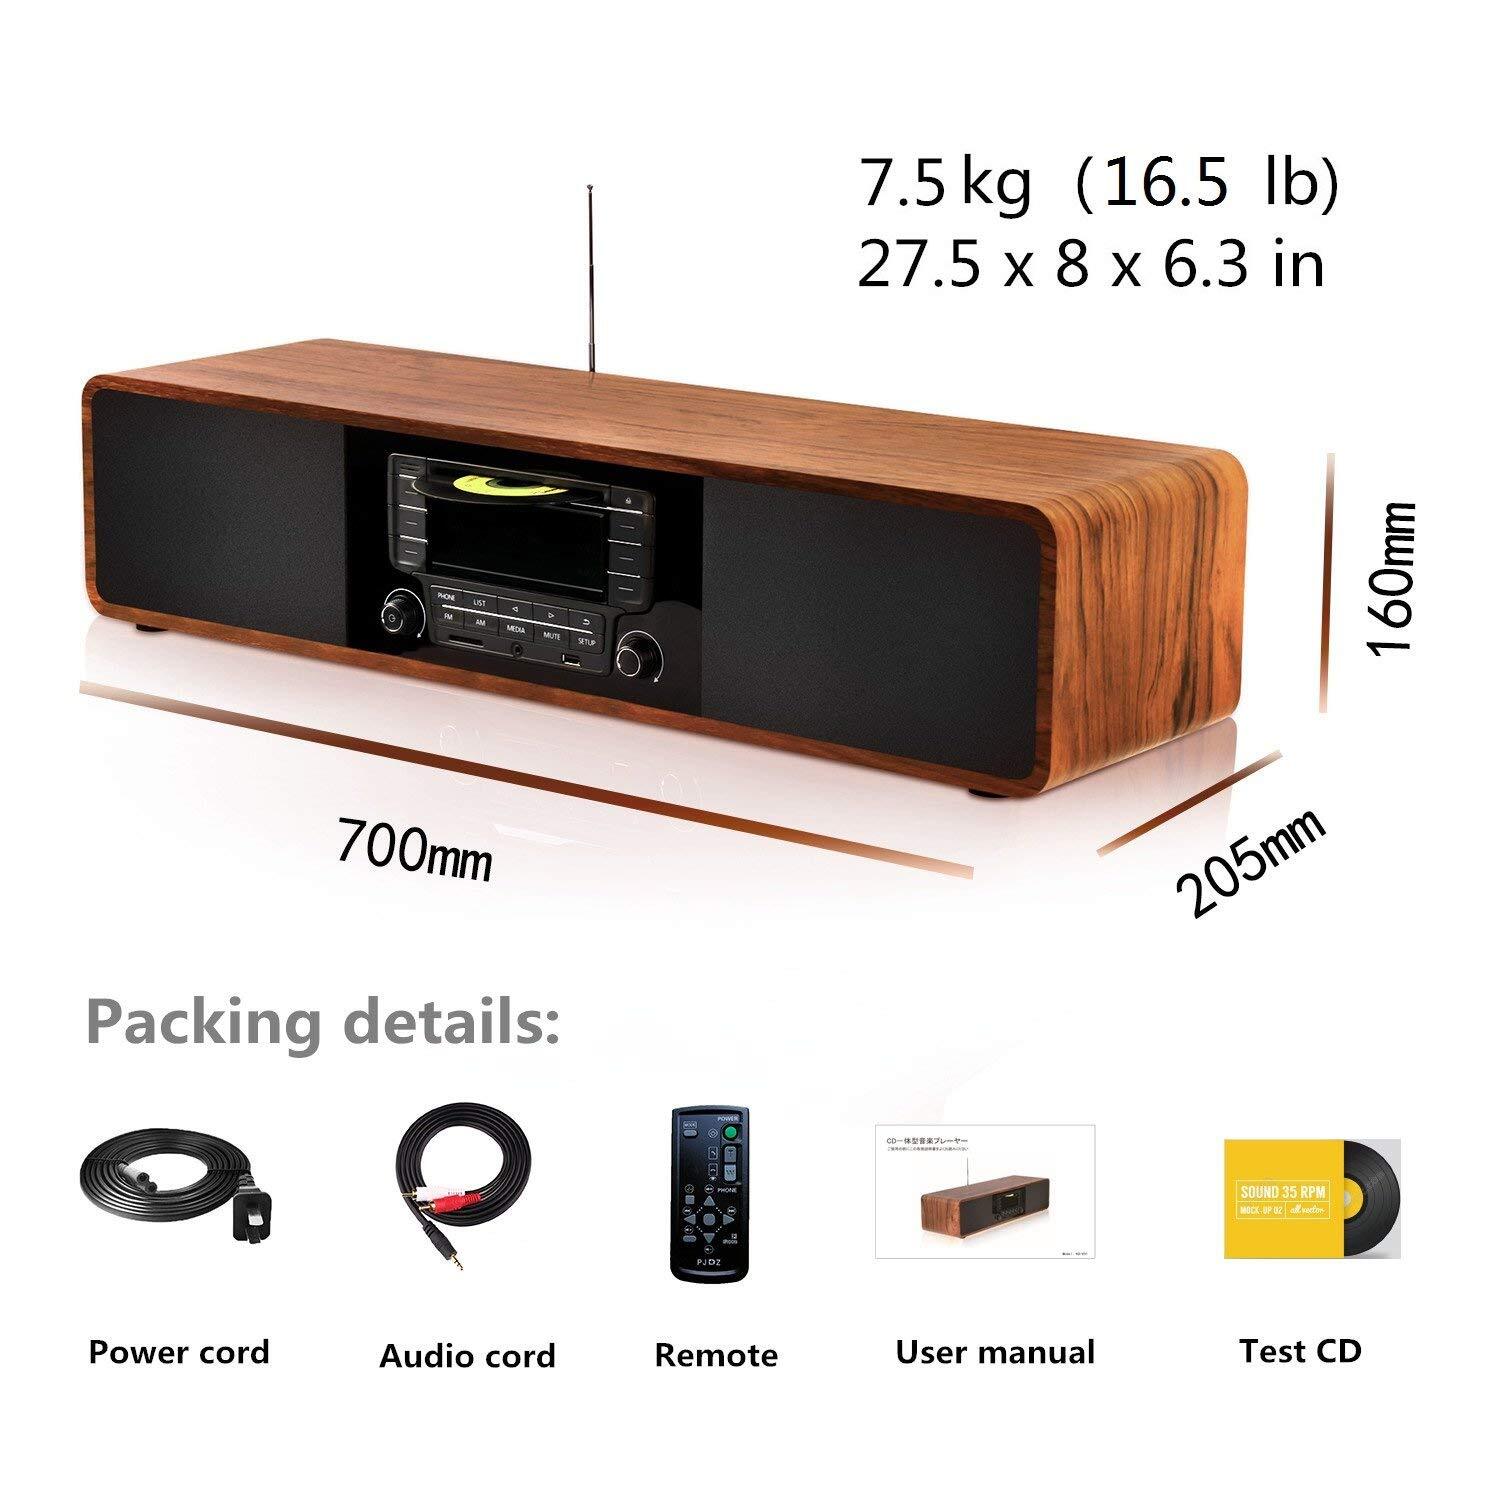 KEiiD Compact CD/MP3 Player Stereo Wooden Desktop Bluetooth Hi-Fi Speaker Portable Boombox Home Audio Component Music System with FM Radio Digital Tuner Remote Control SD AUX,Soundbar